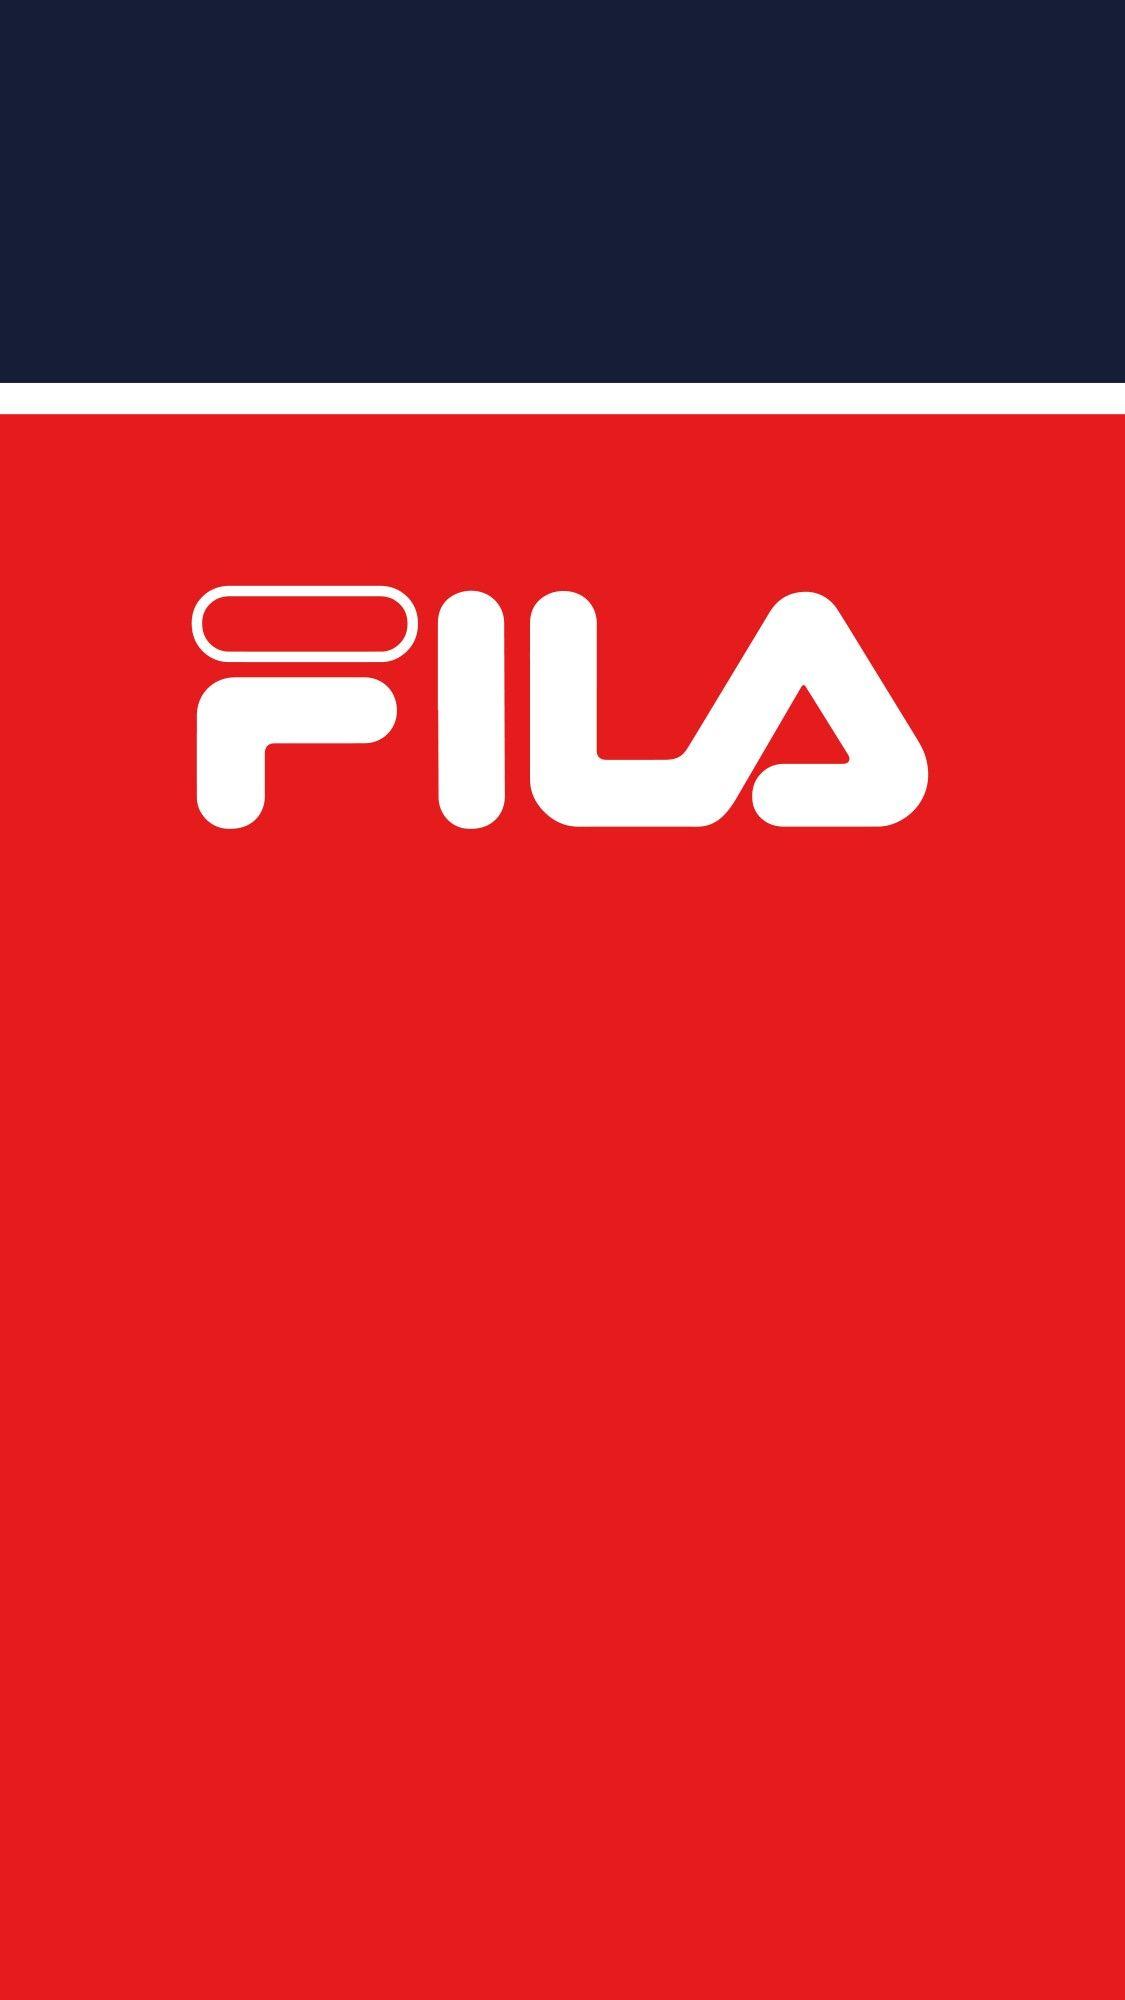 Fila Iphone Wallpapers Top Free Fila Iphone Backgrounds Wallpaperaccess